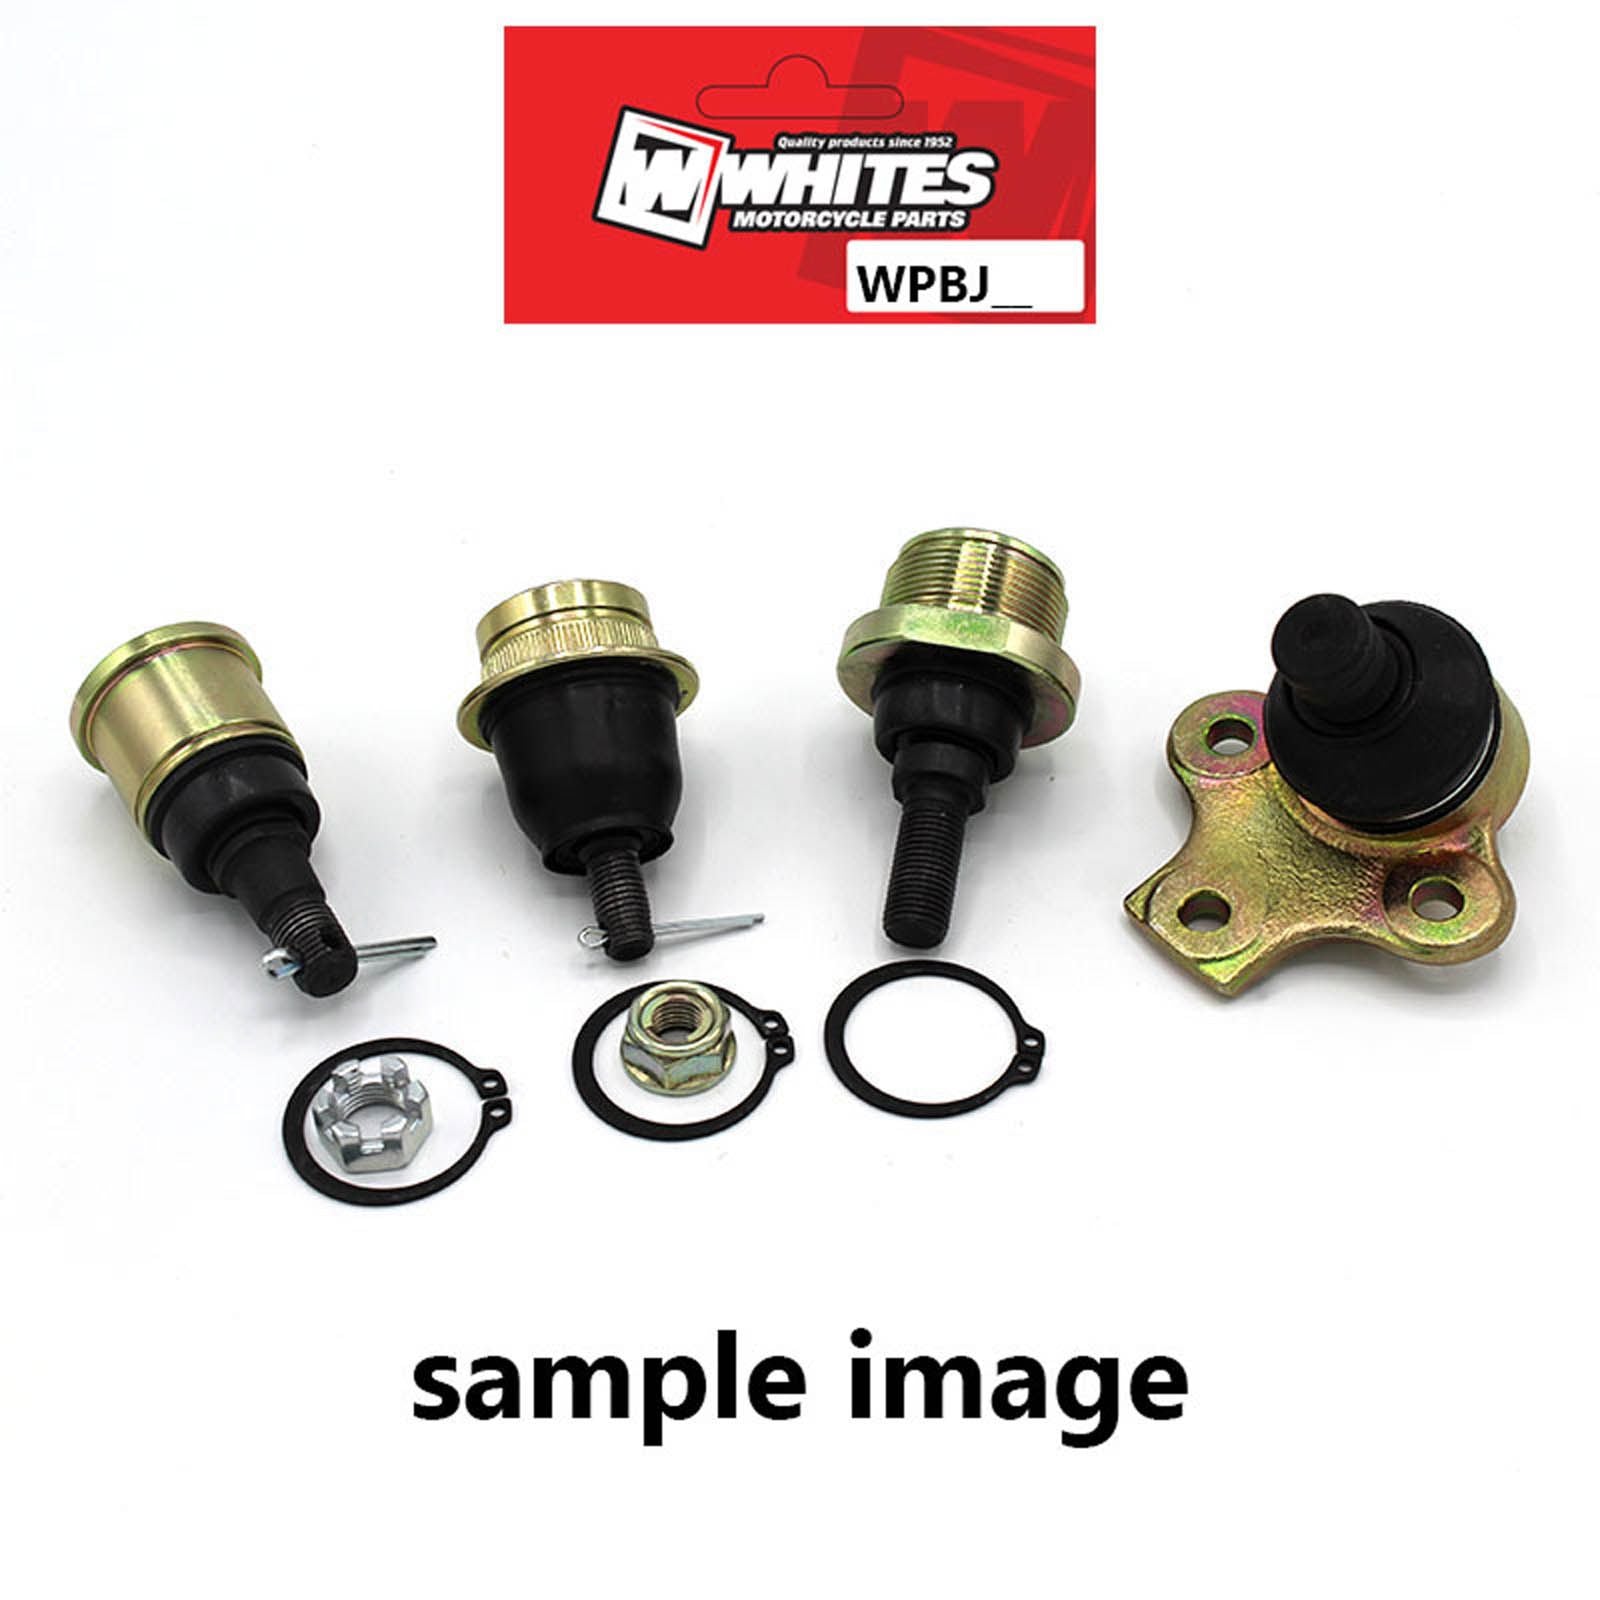 New WHITES Motorcycle Heavy Duty Ball Joint #WPBJ21